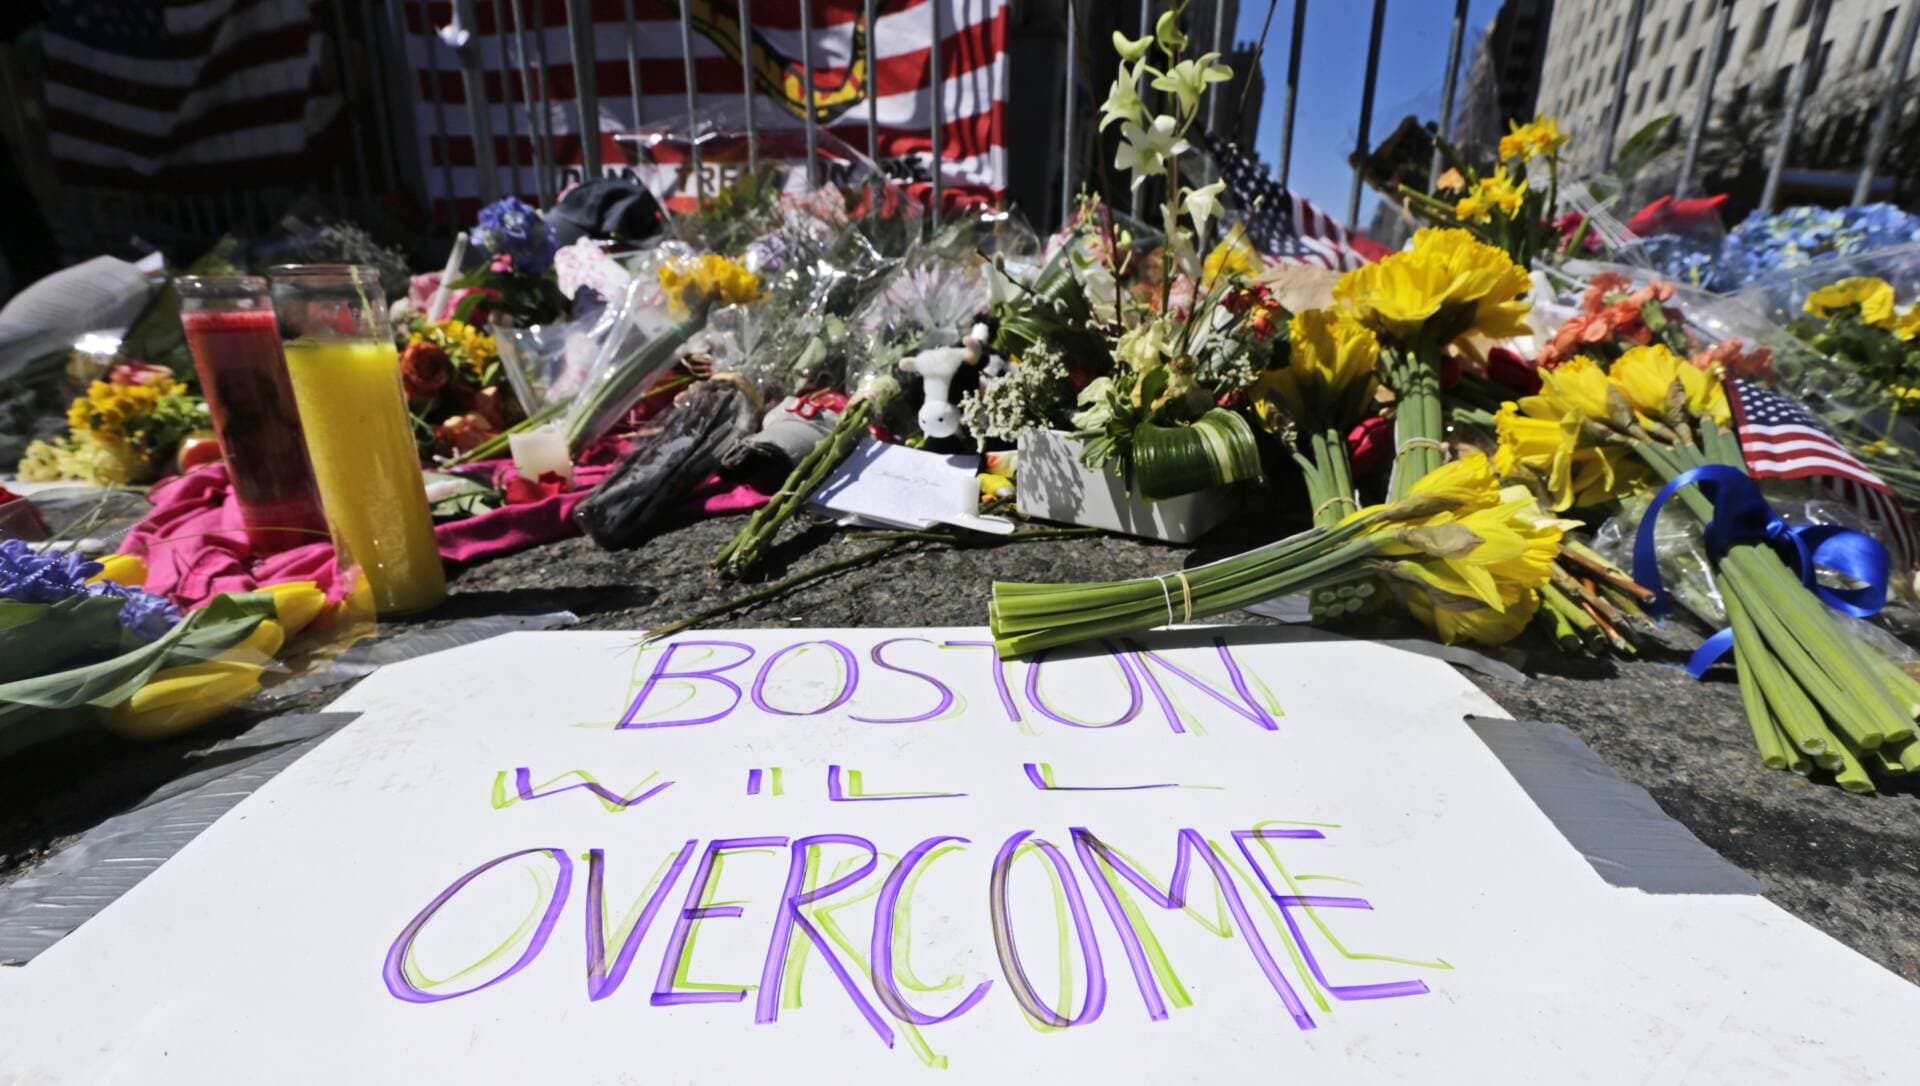 In this April 17, 2013 photograph, a makeshift memorial of flowers and signs adorn a barrier, two days after the explosions at Boylston Street near the finish line of the Boston Marathon. (Charles Krupa/AP)